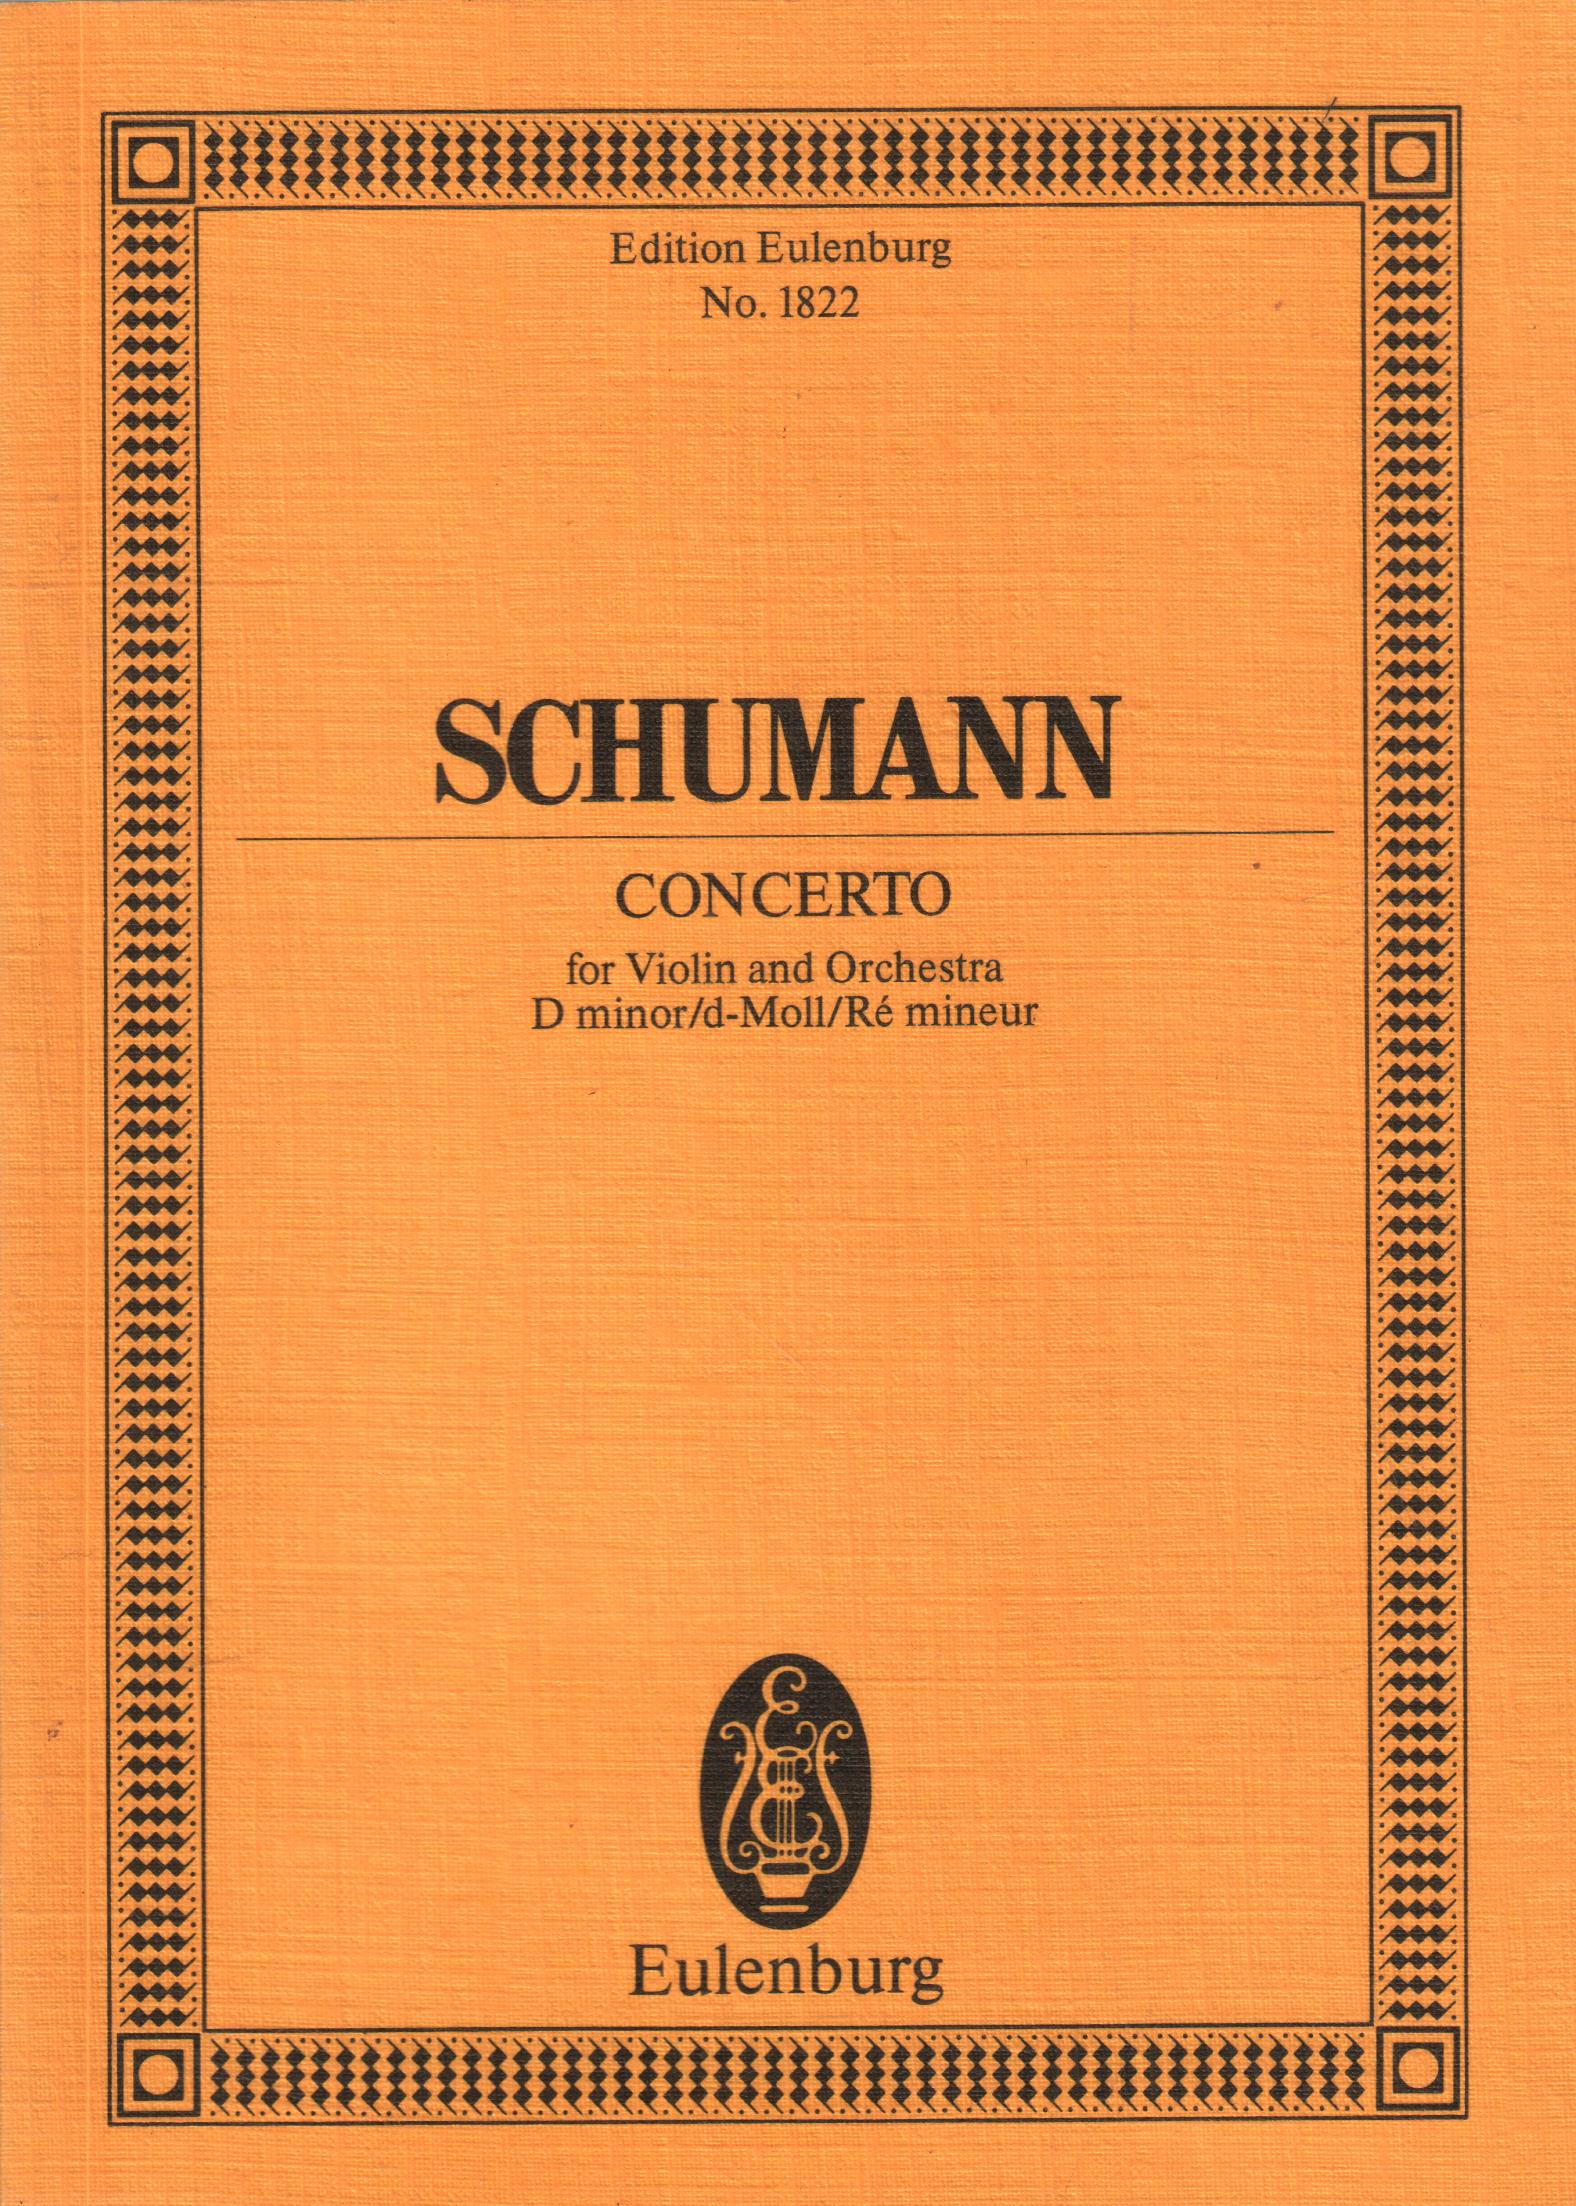 Concerto For Violin and Orchestra. D minor / d-Moll / Re mineur - Schumann, Robert